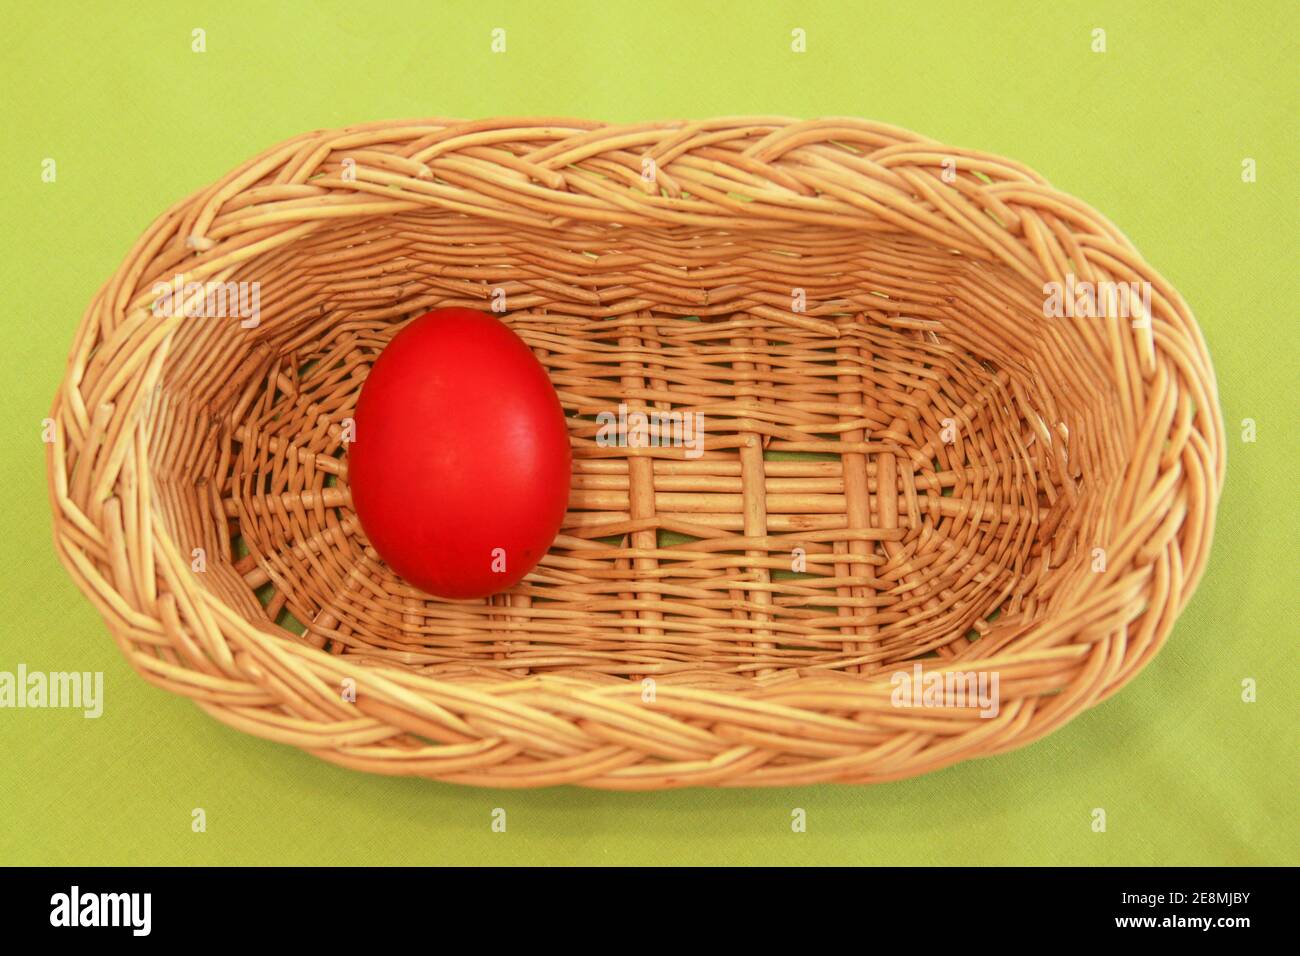 Colored painted Easter eggs in wooden basket decoration in preparation for holiday. Painting chicken or duck eggs is a Christian tradition to celebrat Stock Photo